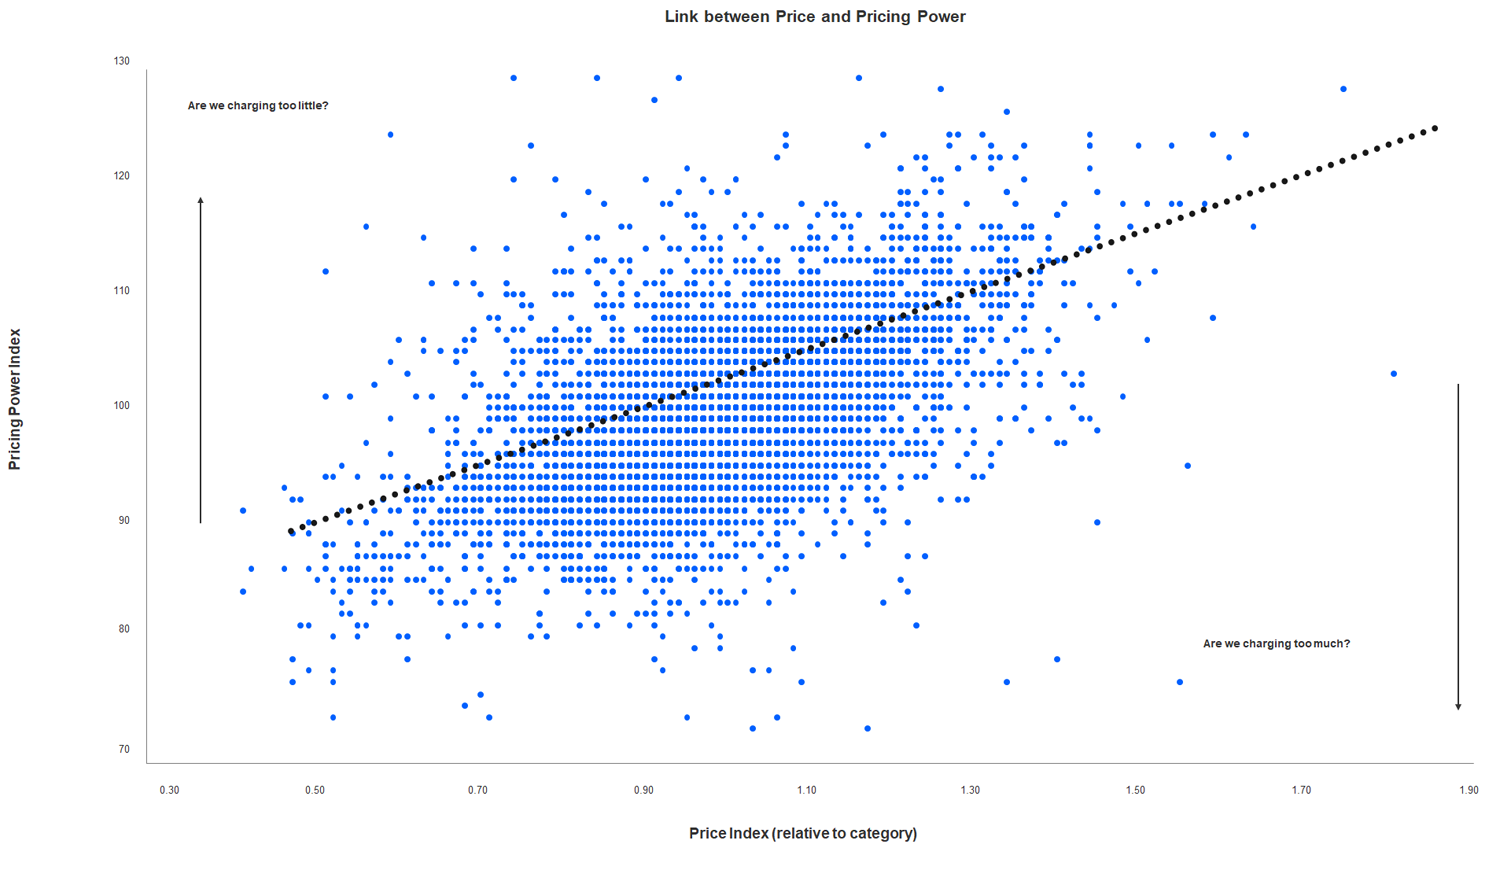 Scatter graph showing the correlation between price and pricing power